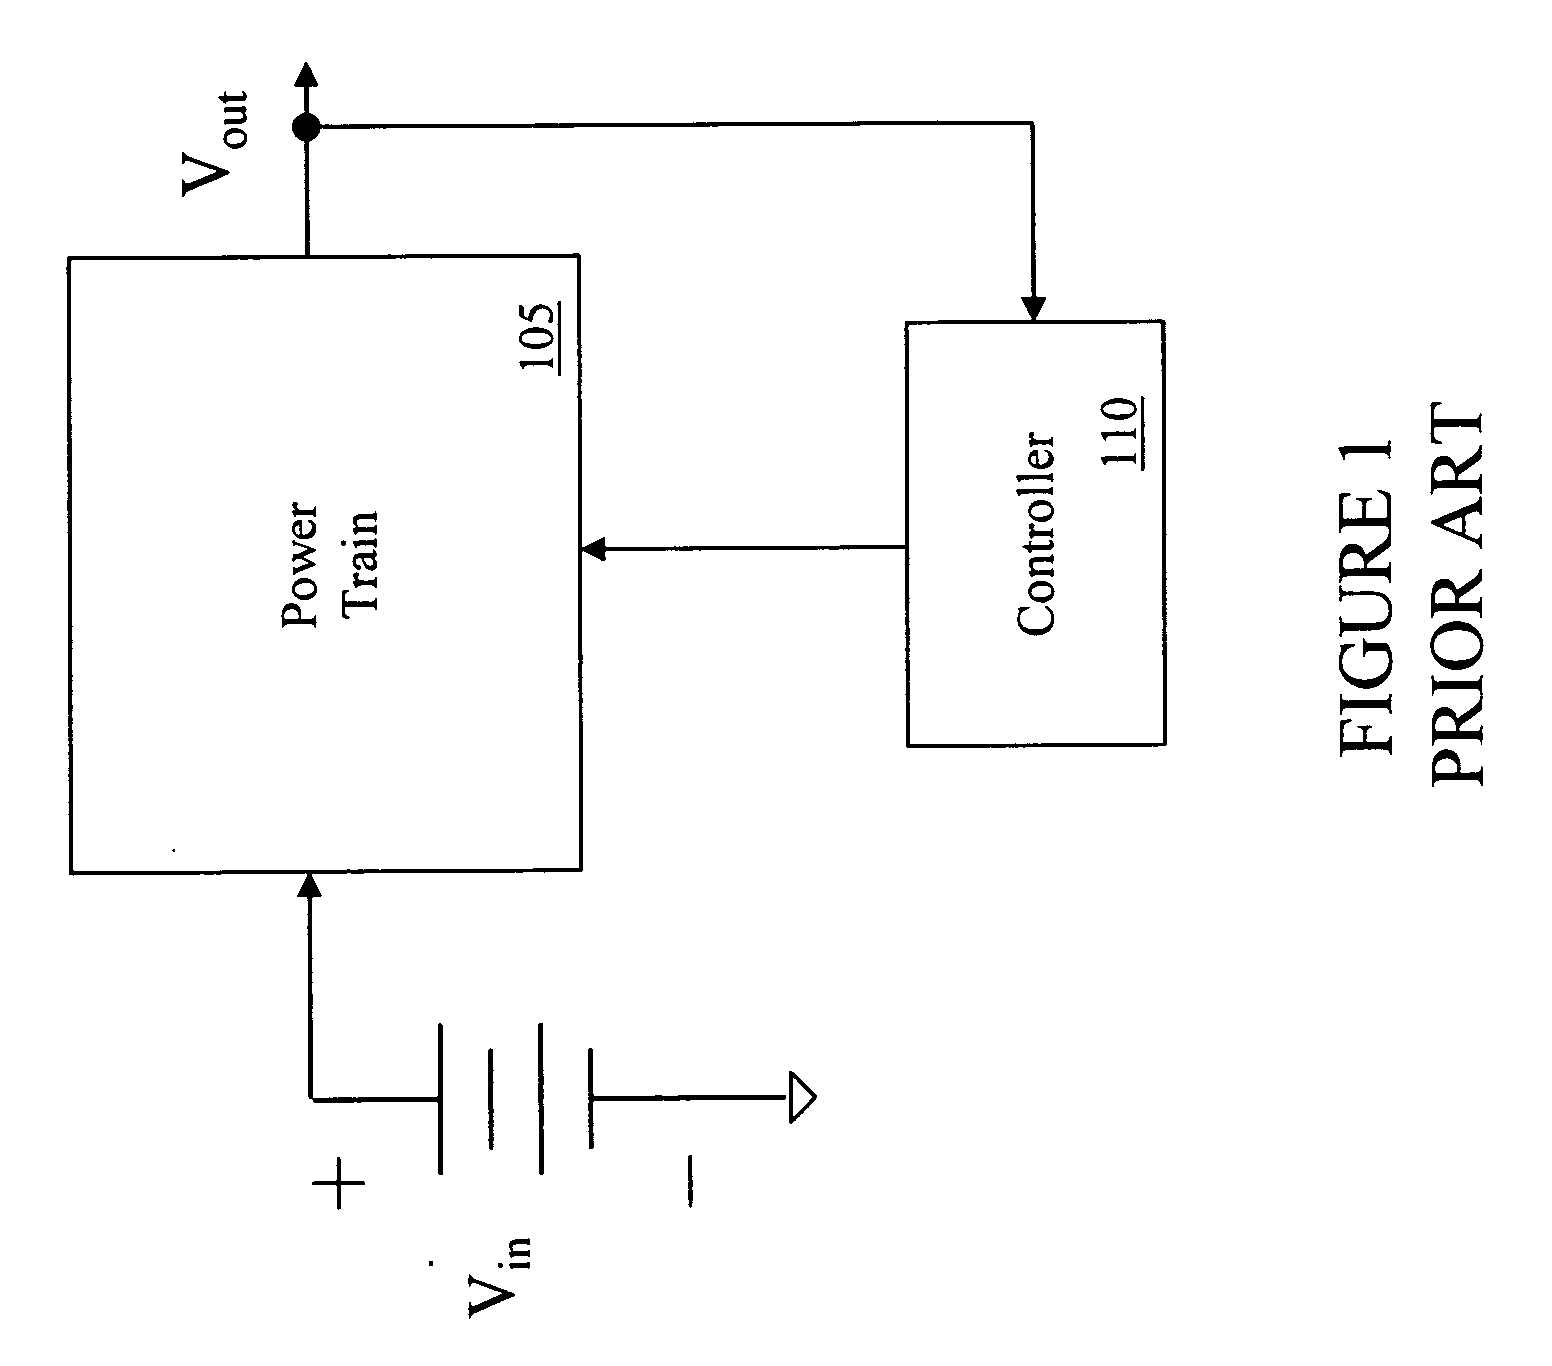 Power converter with an adaptive controller and method of operating the same